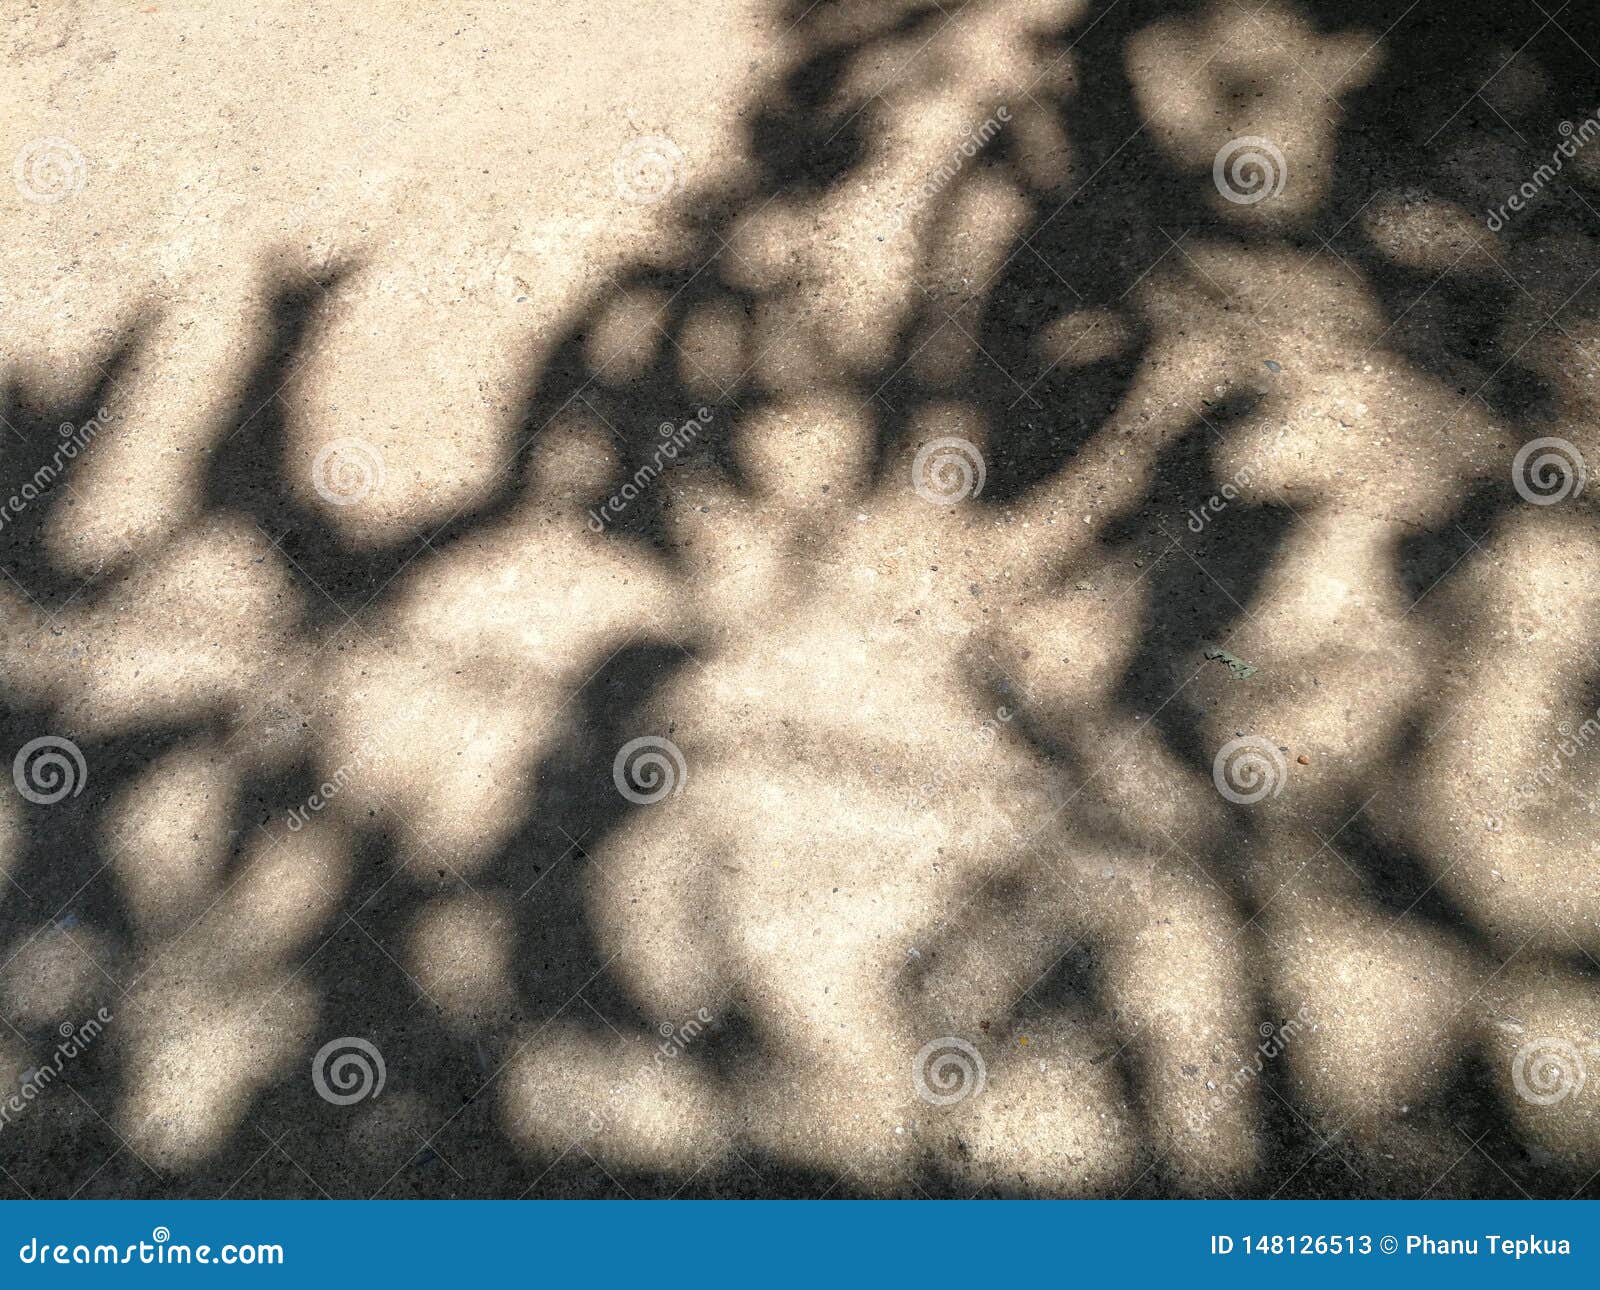 Shadow of the Tree on Grunge Concrete Background Stock Image - Image of ...